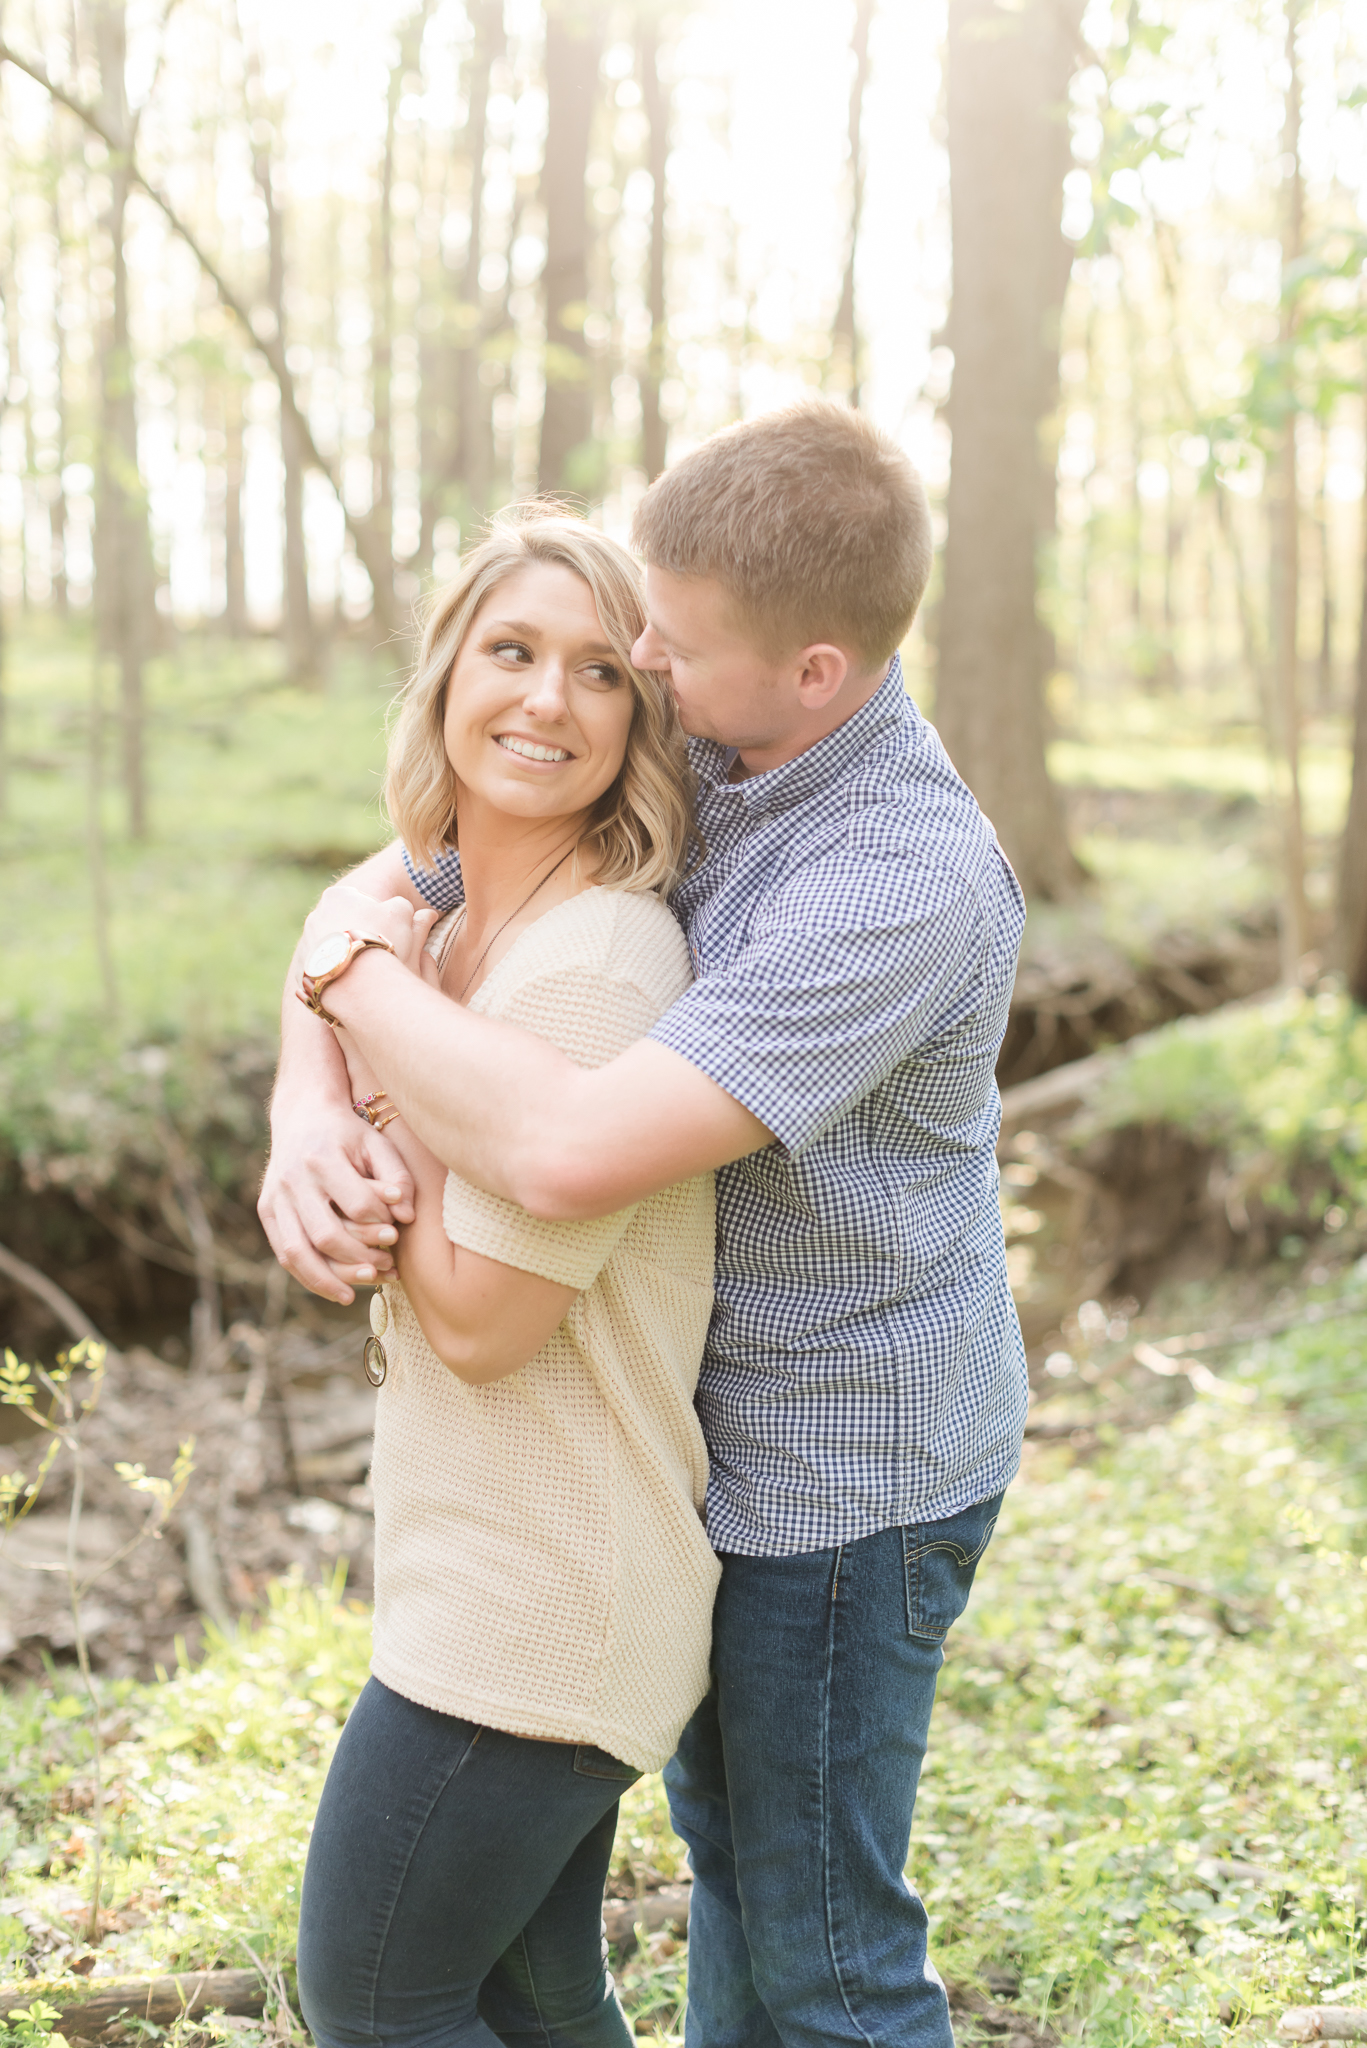 Richie Woods Nature Preserve and Mustard Seed Gardens Engagement Session Wedding Photos-22.jpg